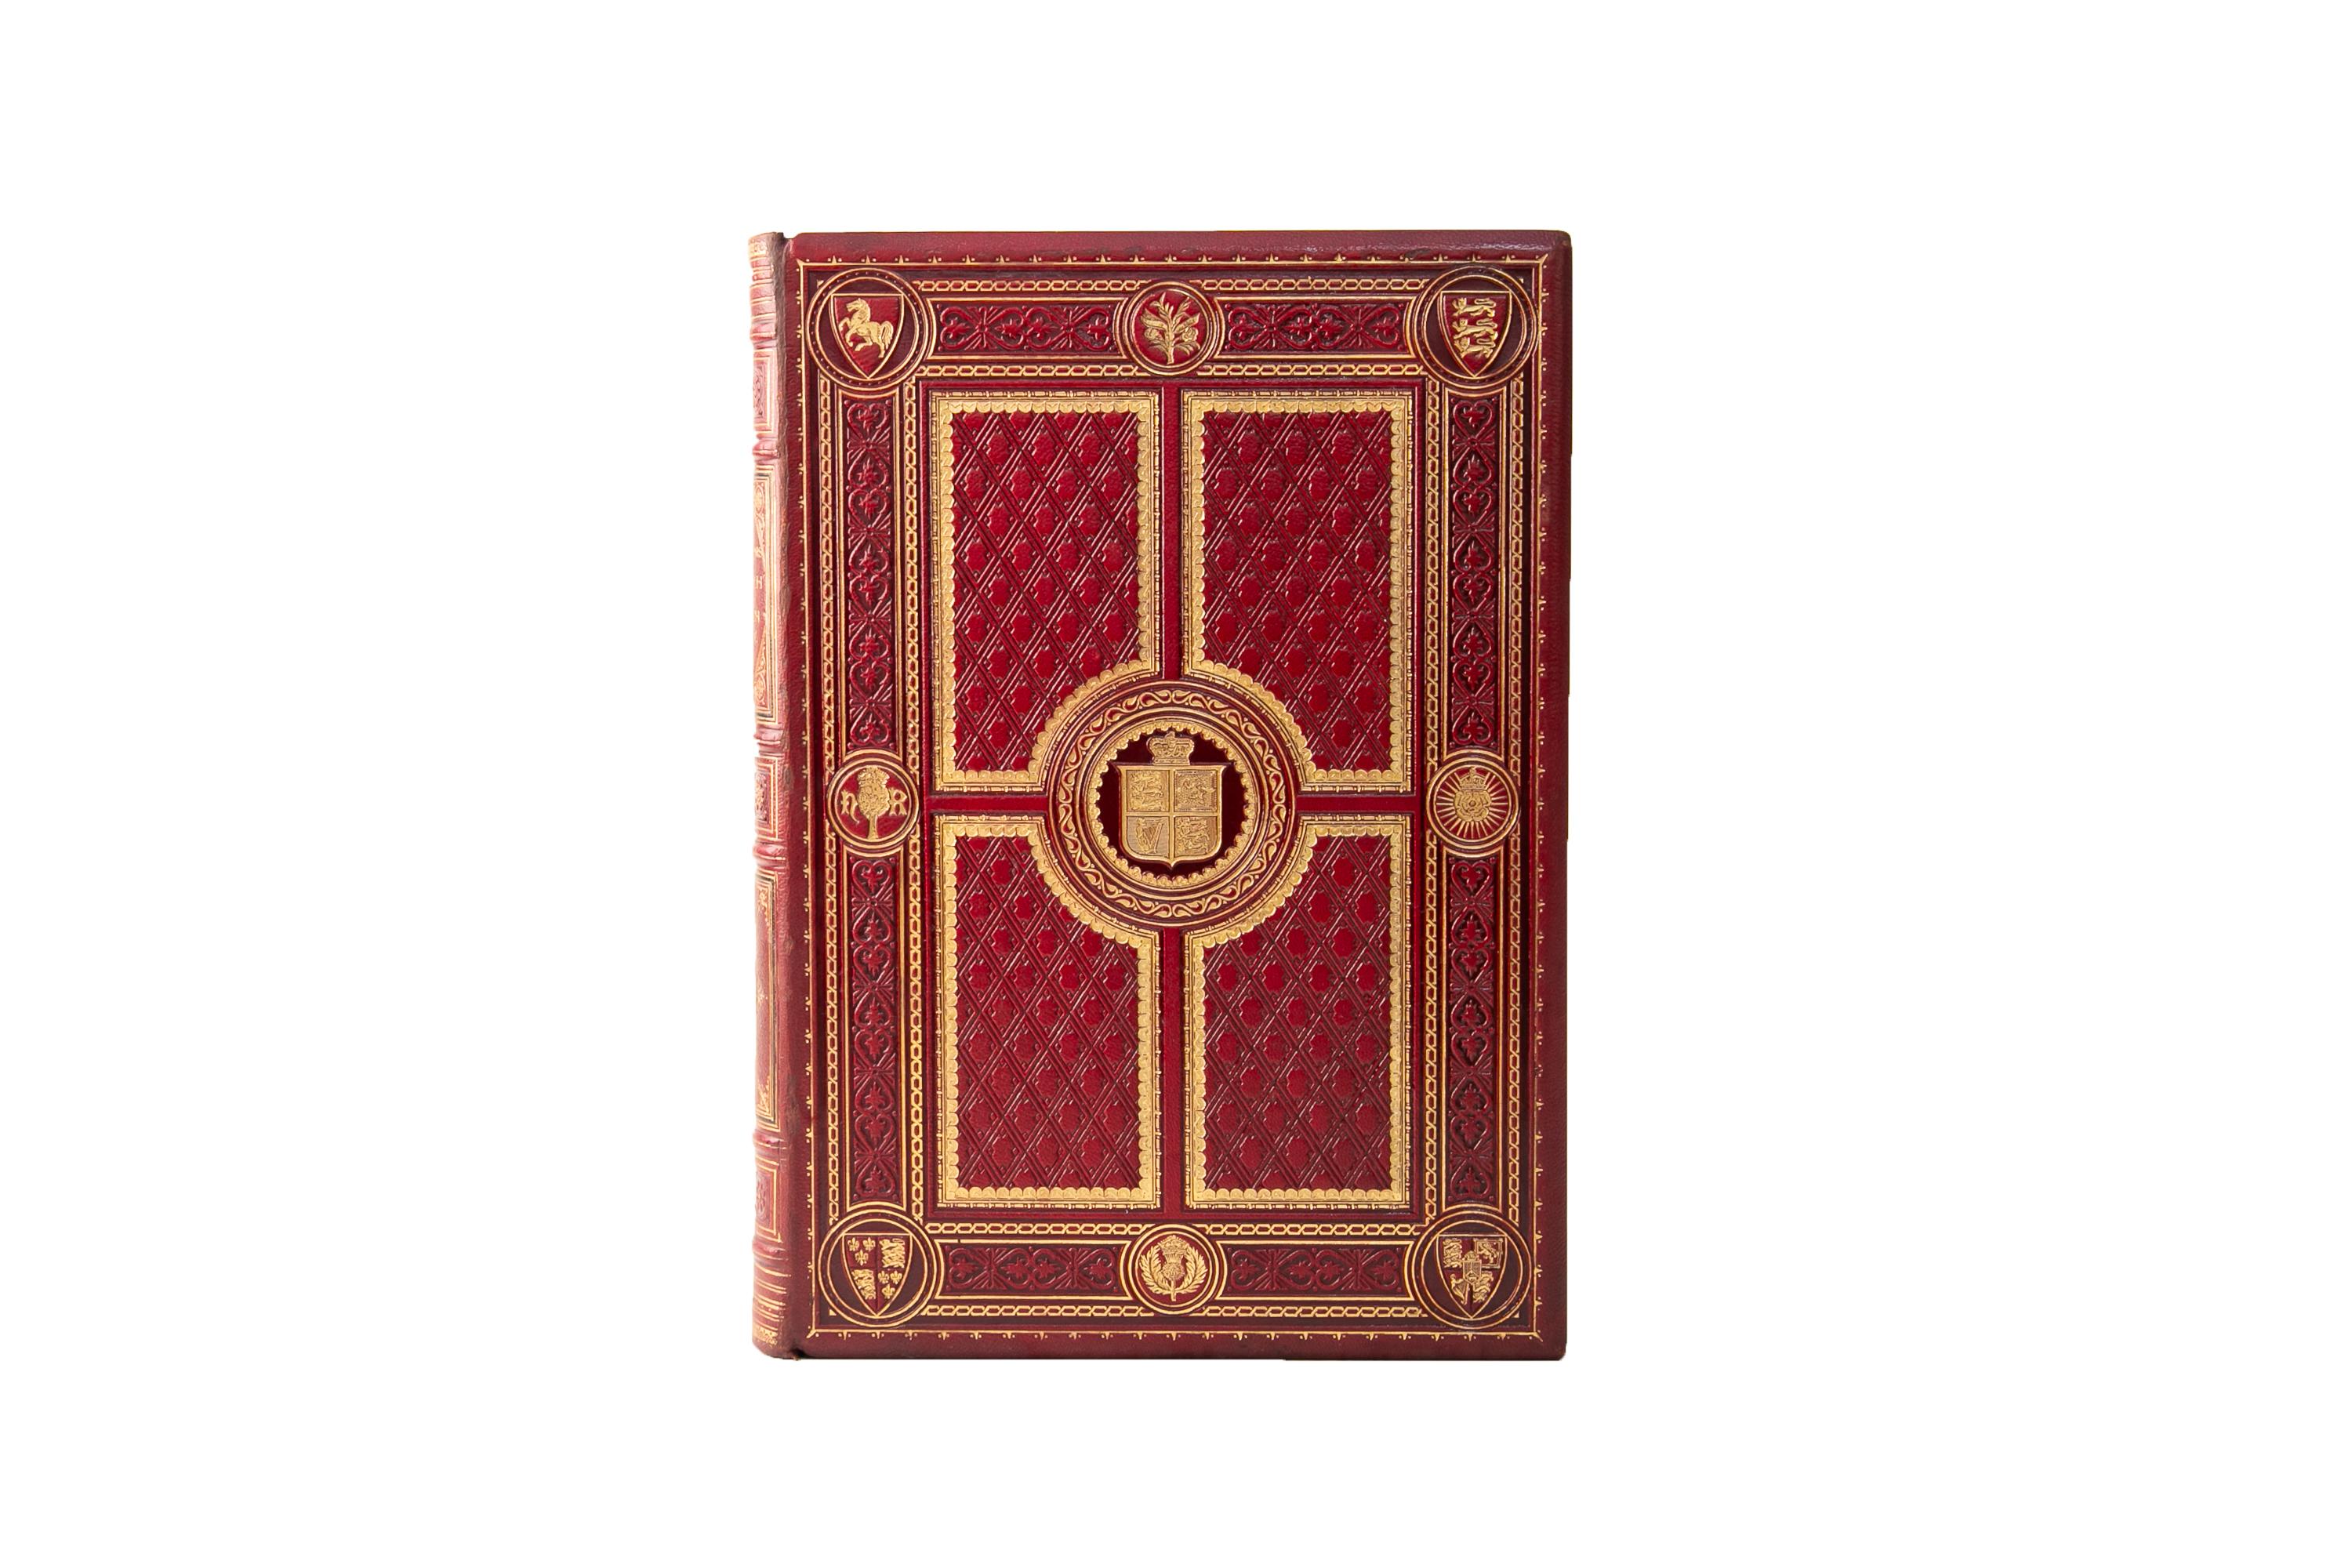 2 Volumes, Thomas Archer, Pictures and Royal Portraits Illustrative of English and Scottish History. Bound in the publisher's pezux binding in full red morocco with the covers displaying incredibly ornate and detailed gilt and open tooling depicting